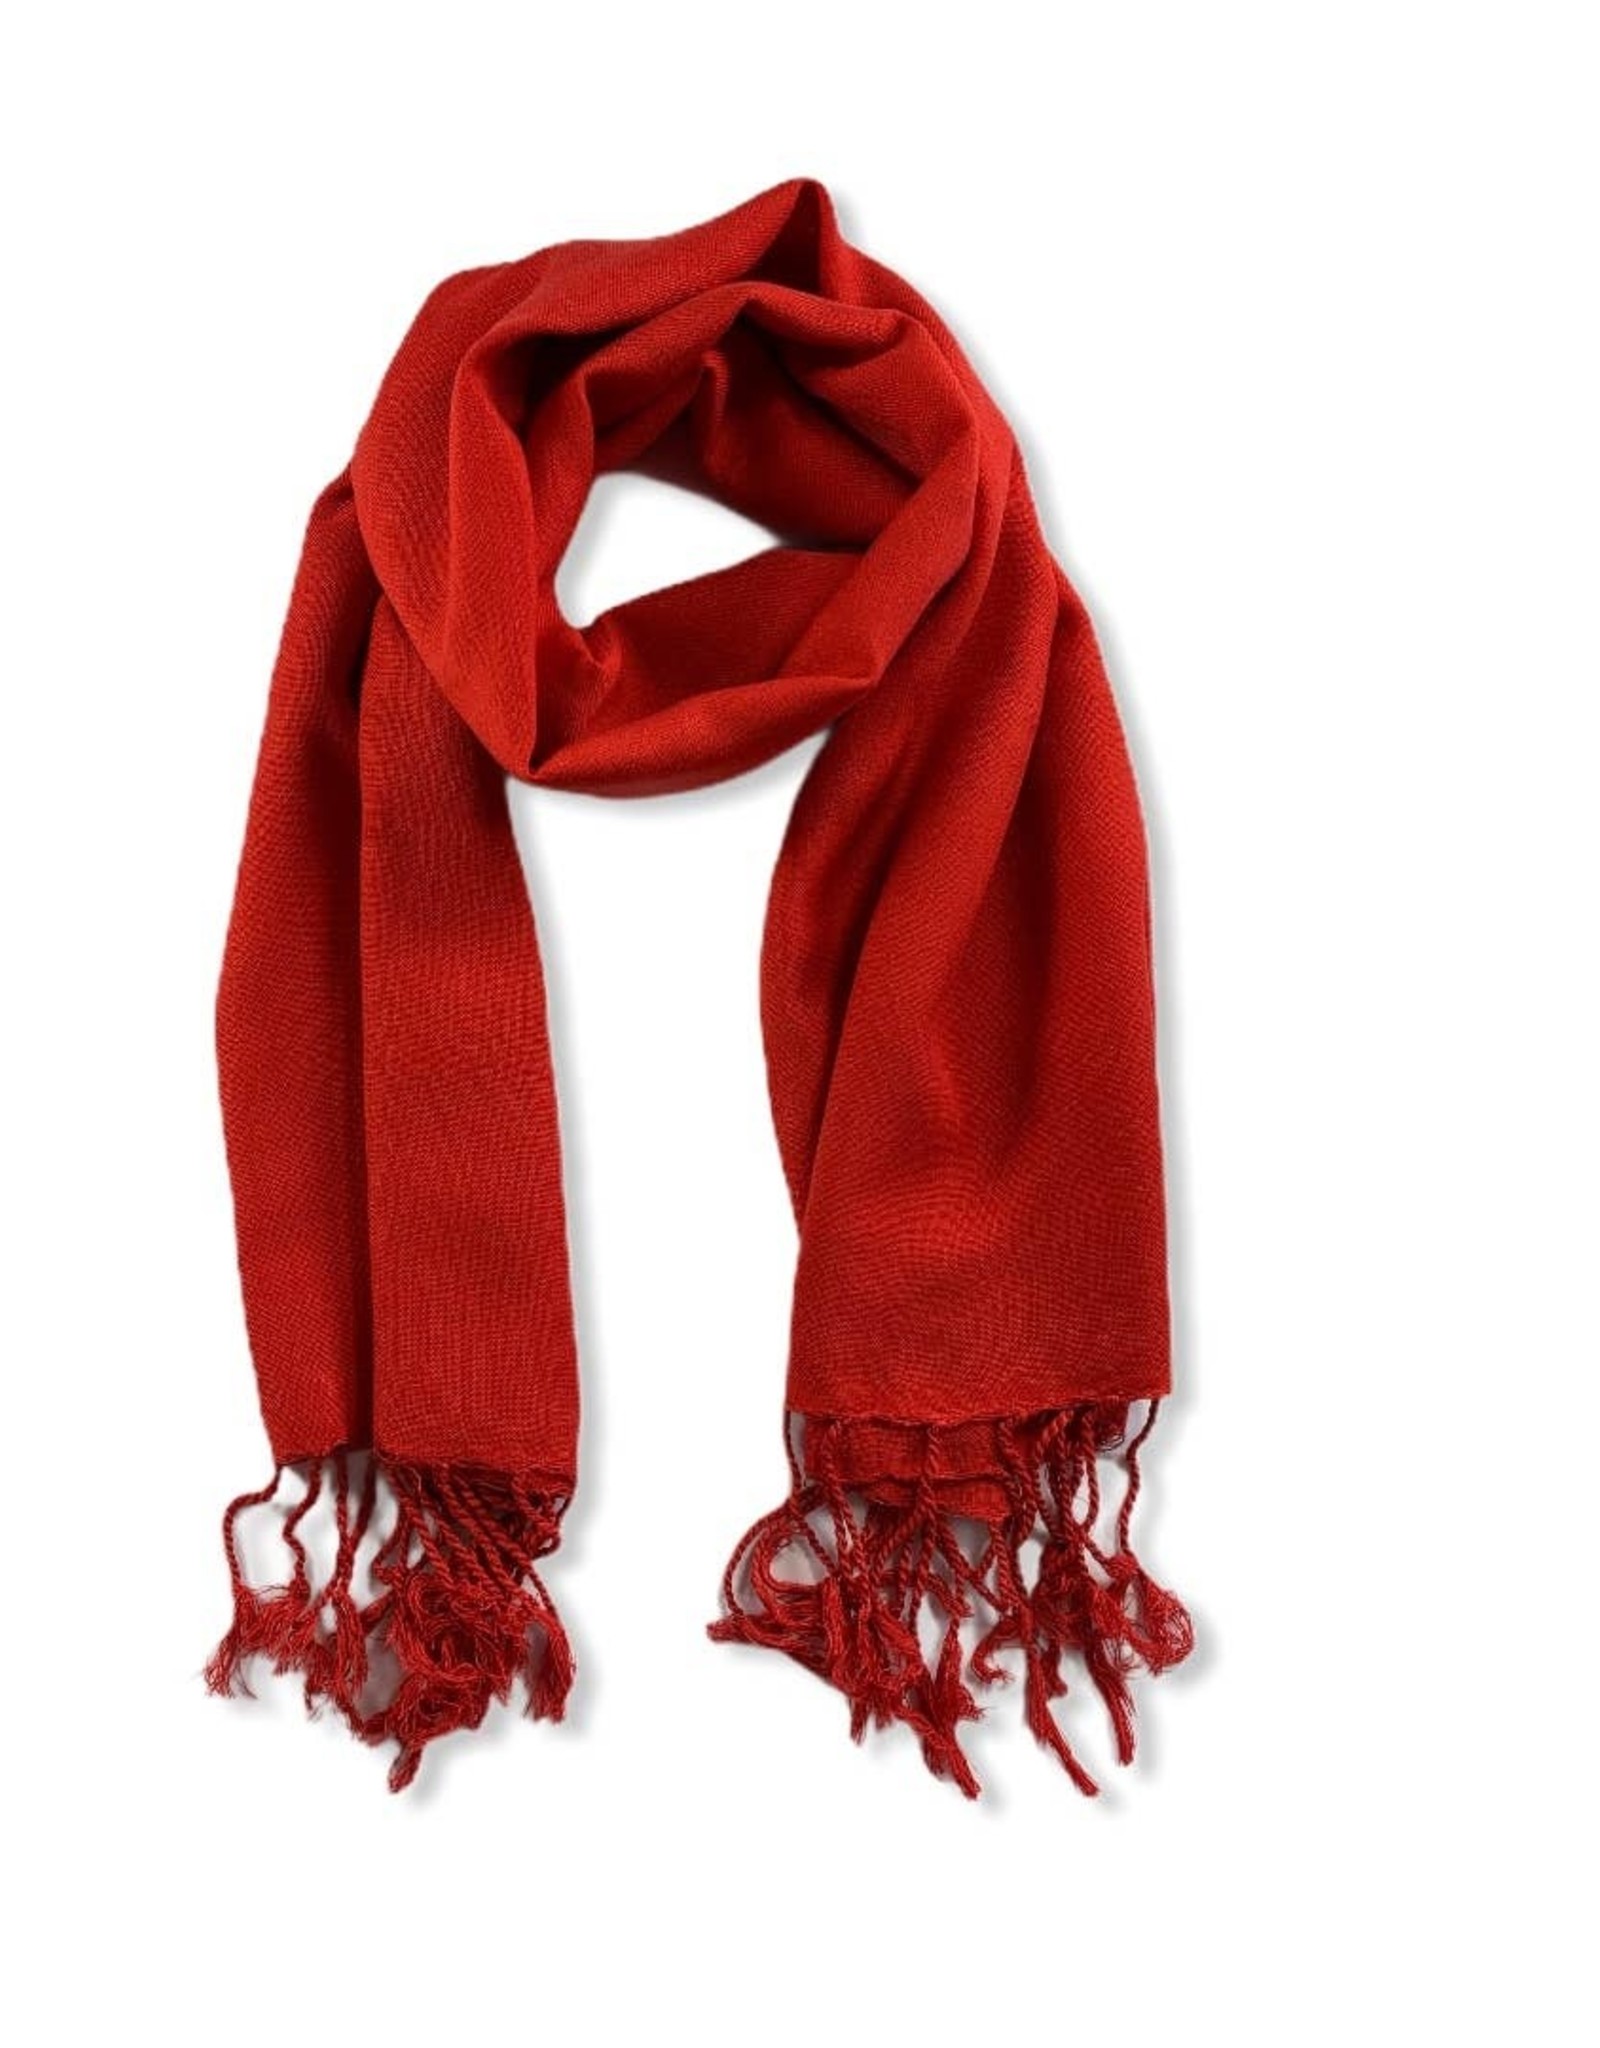 Dandarah Small Solid Handwoven Scarf - Red